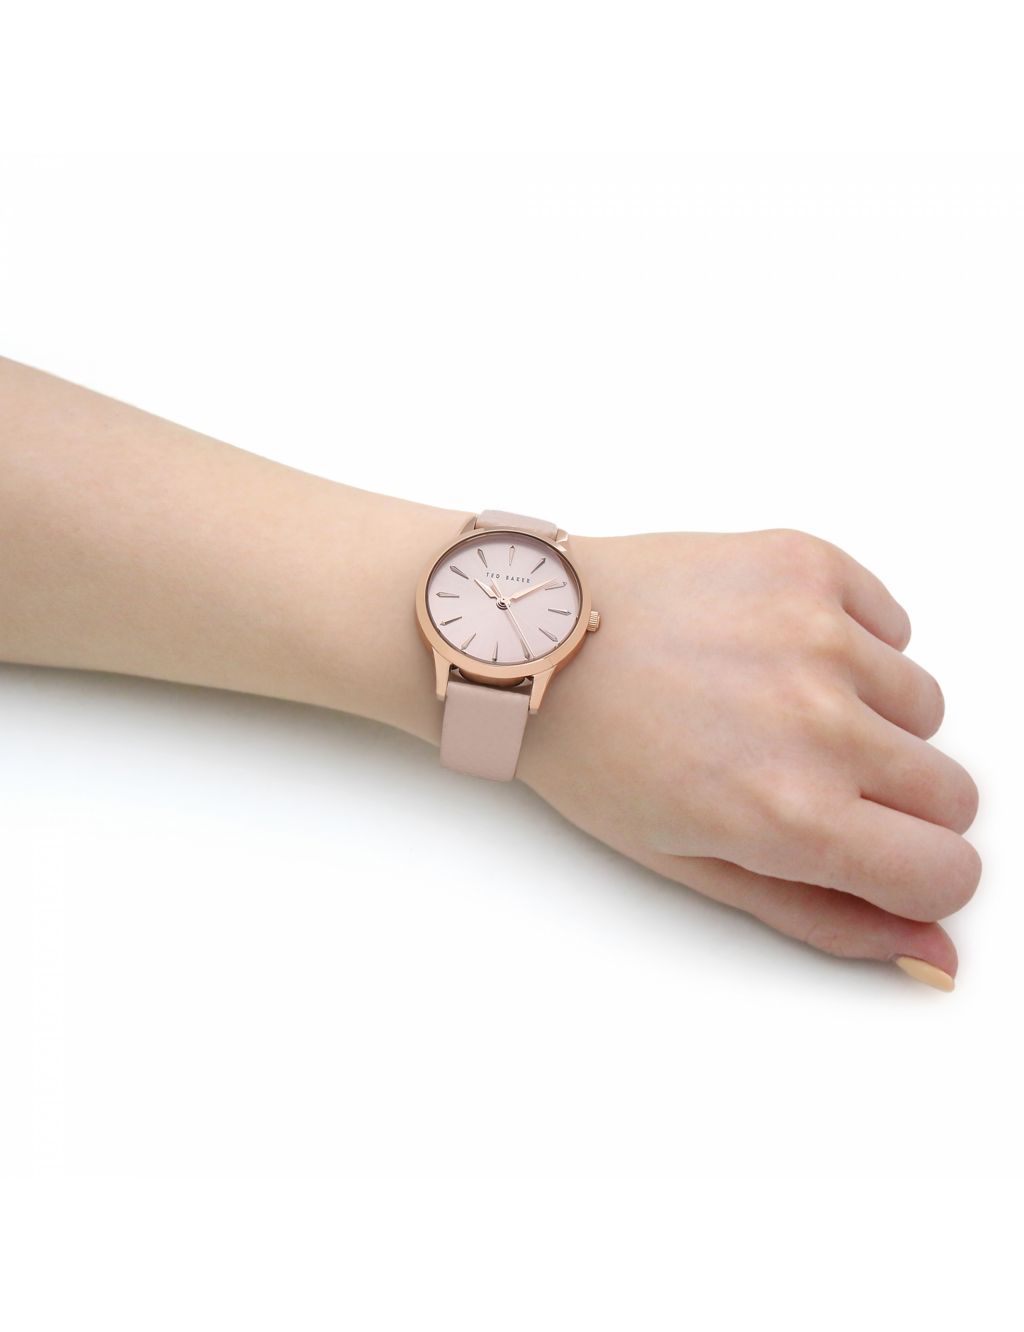 Ted Baker Fitzrovia Charm Pink Leather Watch image 3